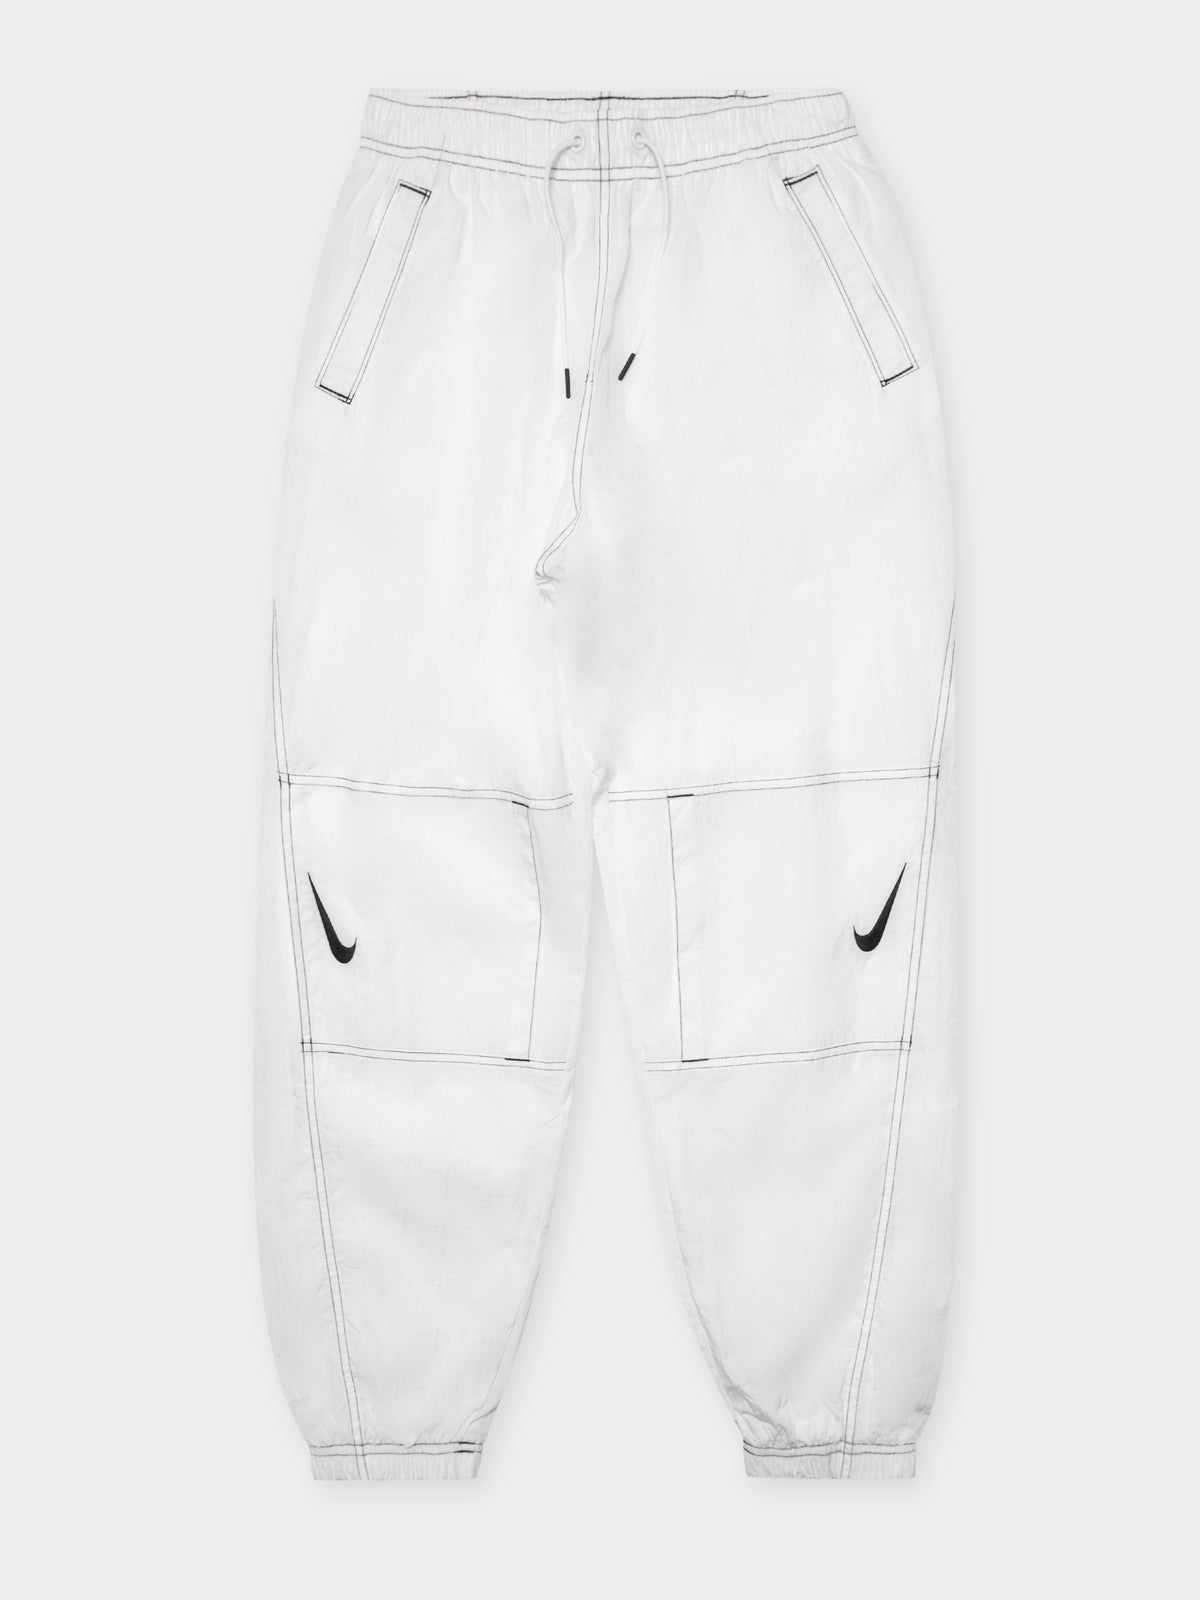 NSW Repel Swoosh Track Pants in White &amp; Black